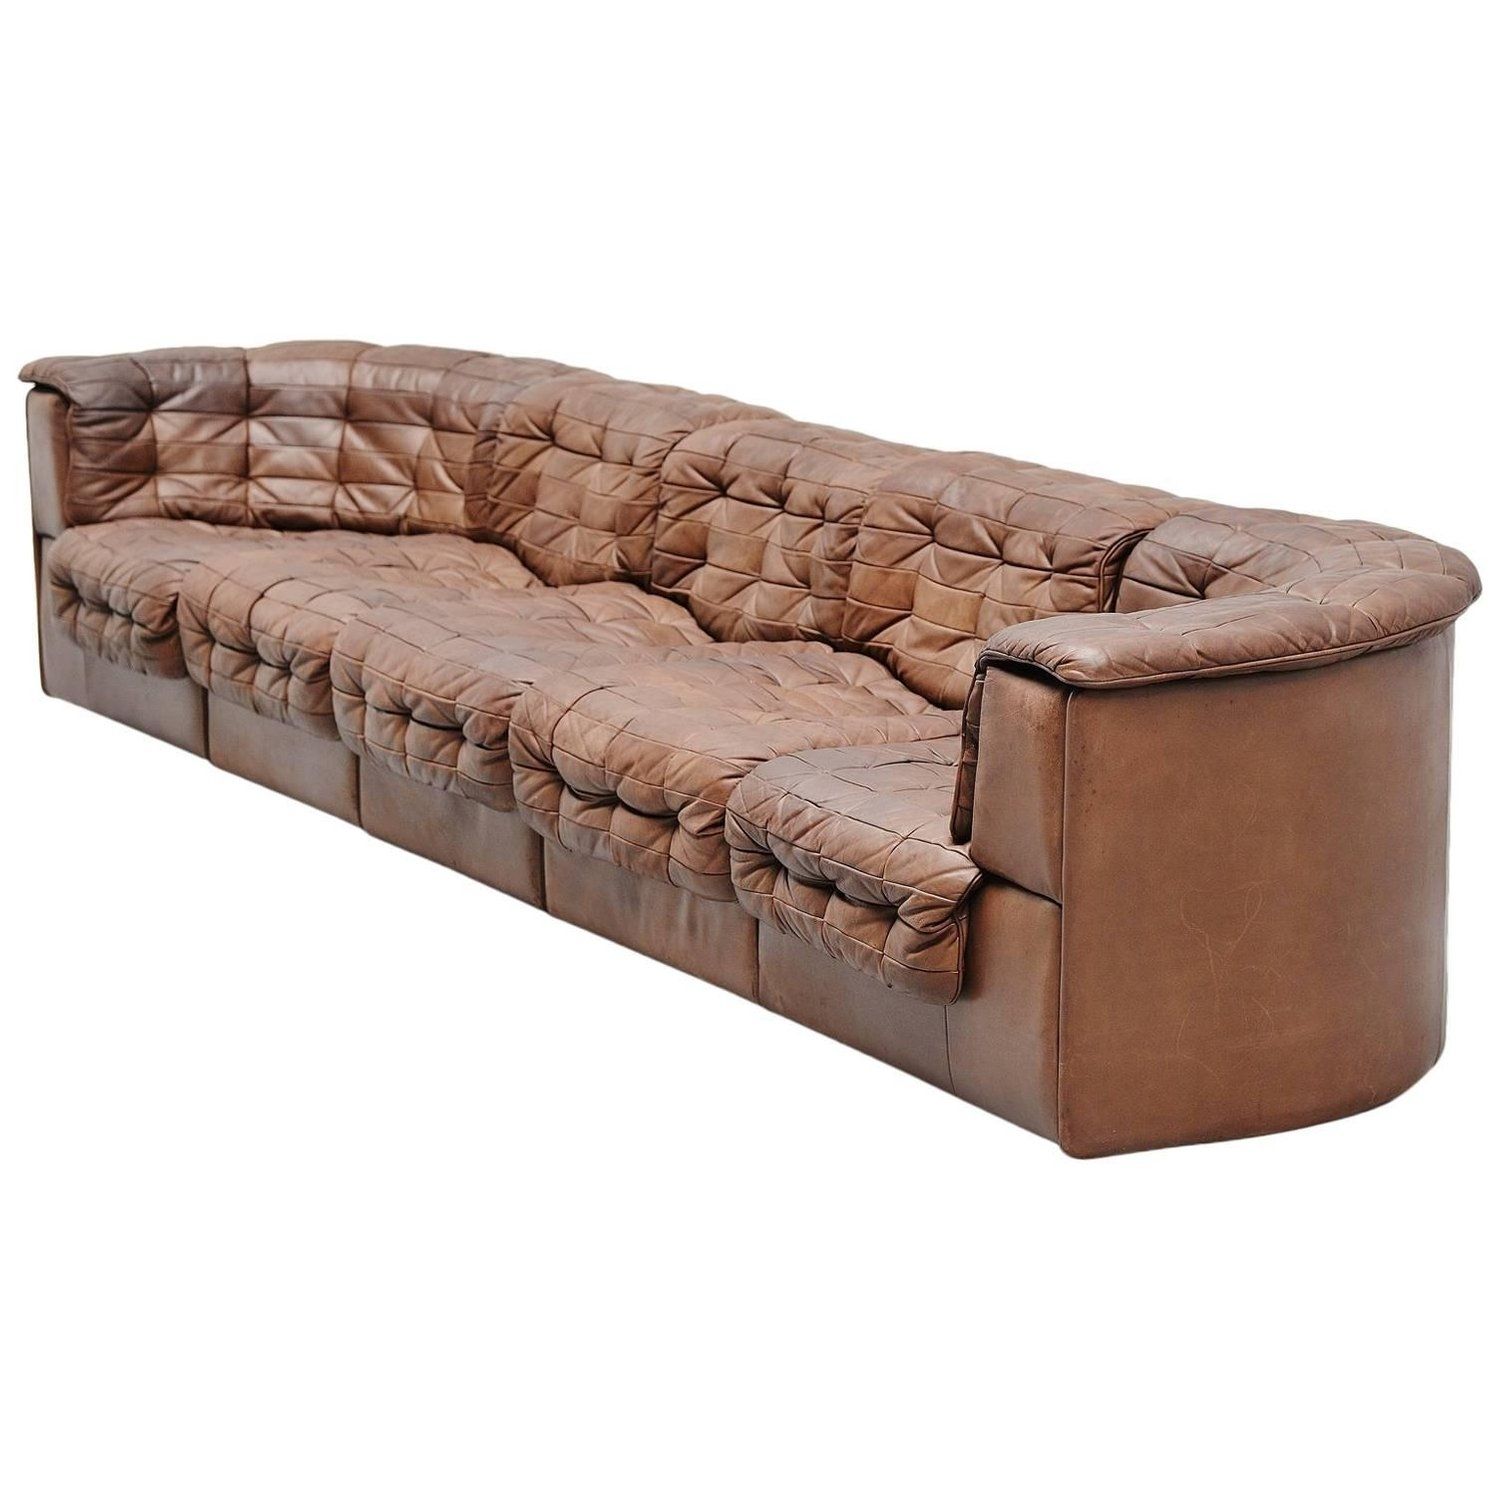 Sectional Couches Buffalo Ny | Reference Of Sofa And Couch Pertaining To Sectional Sofas At Buffalo Ny (Photo 8 of 10)